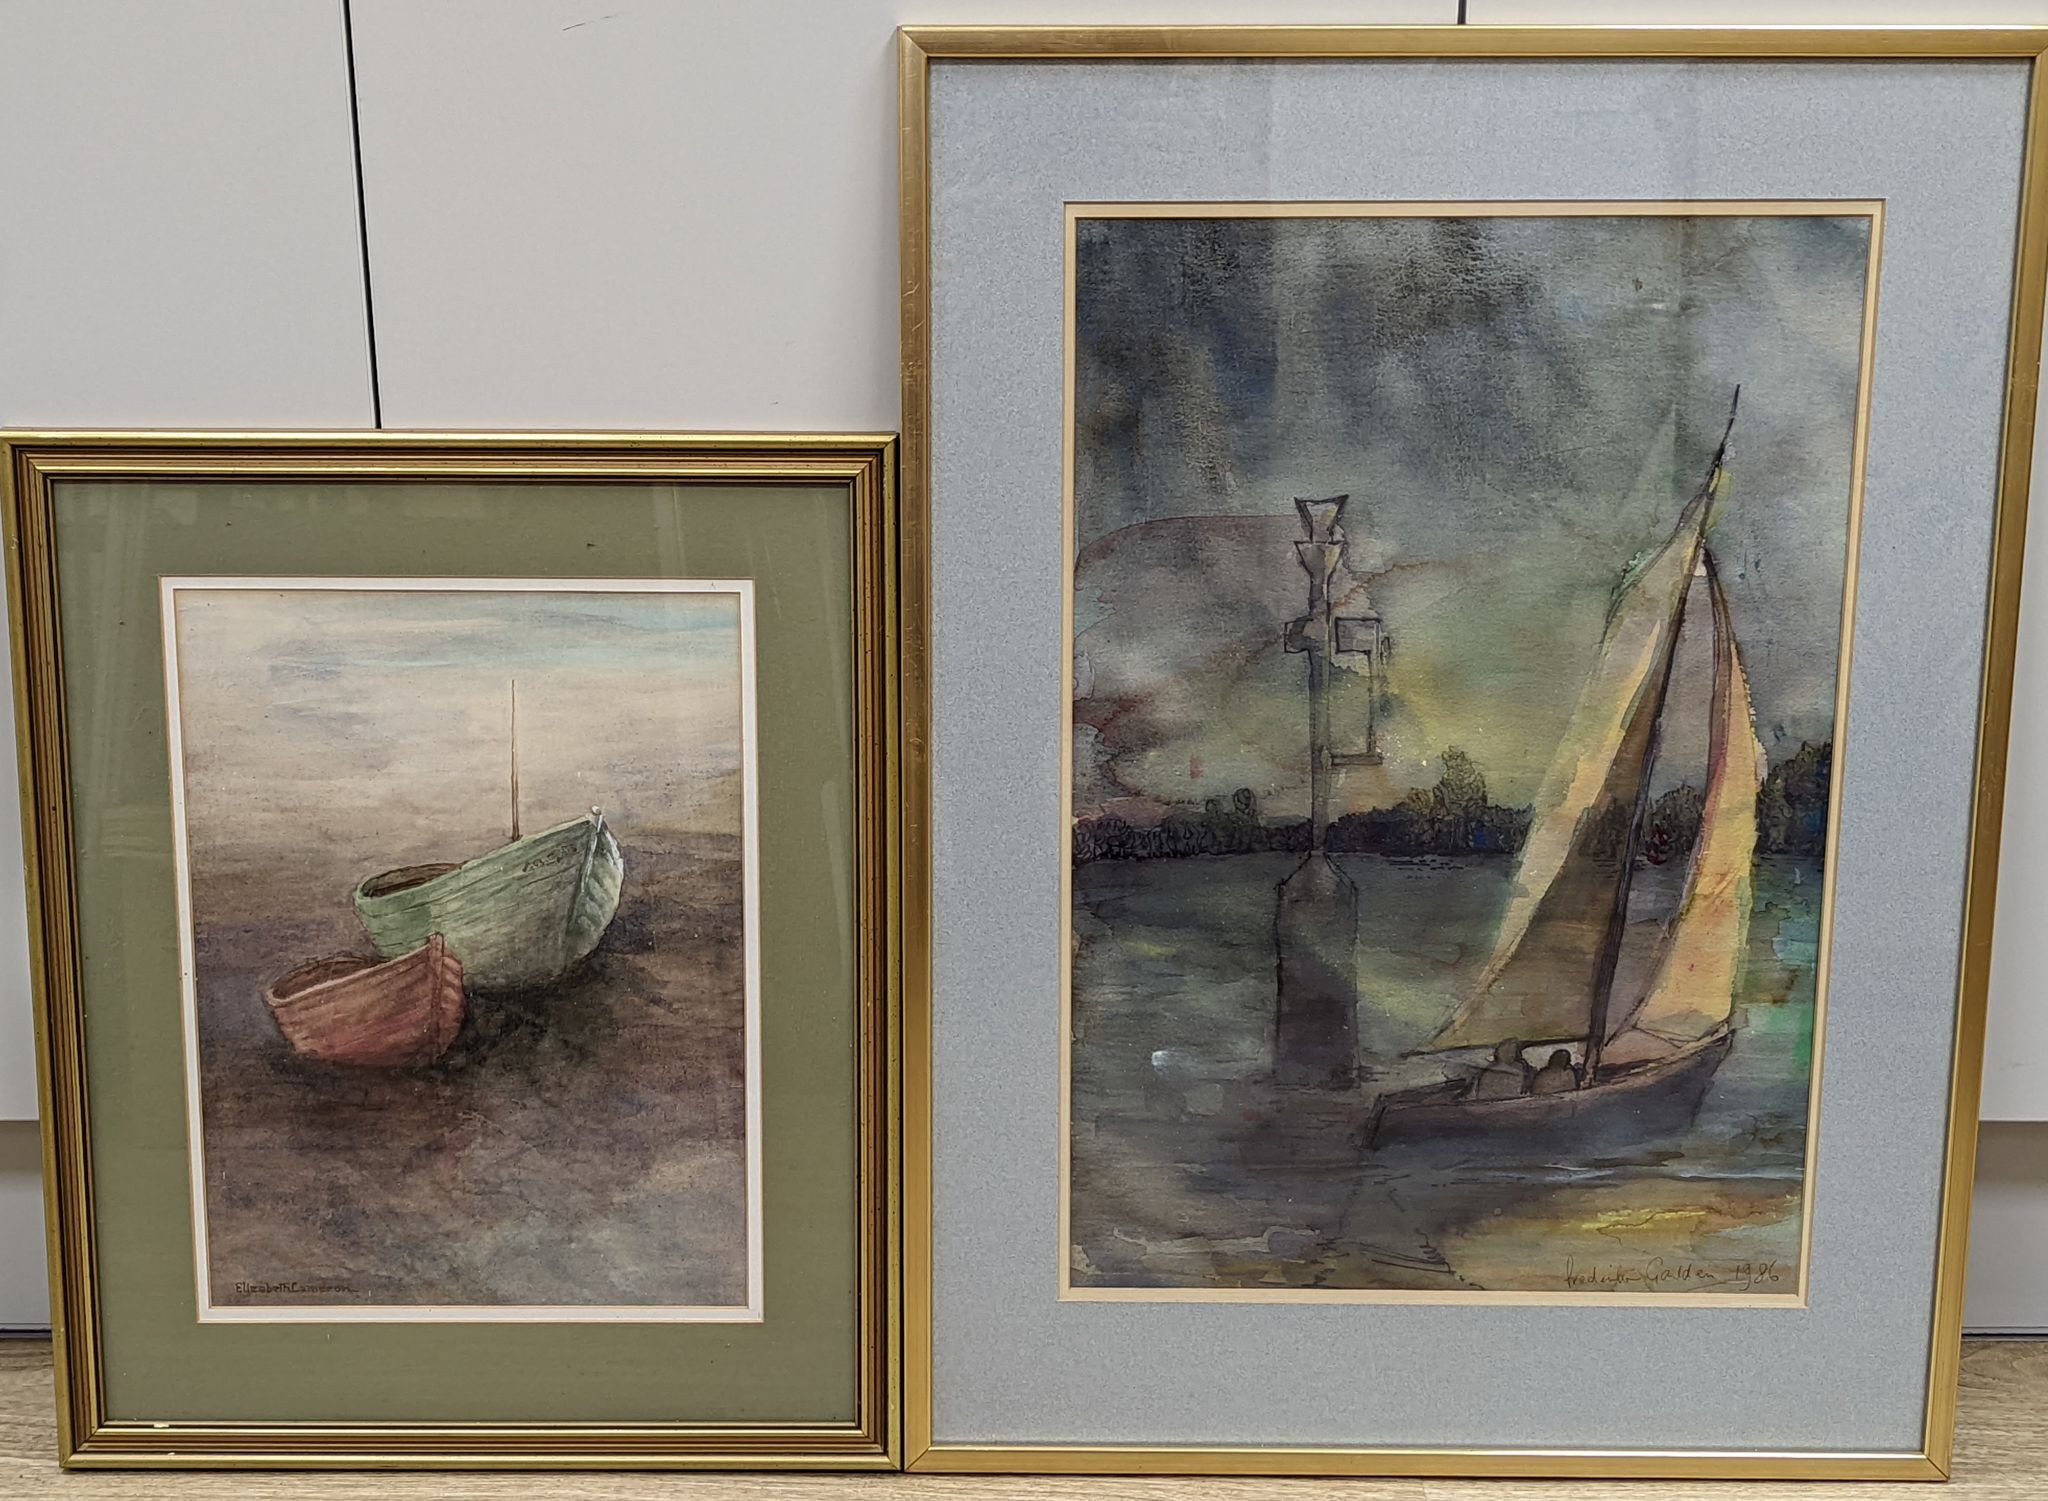 Frederick Galden, watercolour, Sailing dingy on an estuary, signed and dated 1986, 52, x 35cm and an Elizabeth Cameron watercolour of fhisng boats, 35 x 26cm